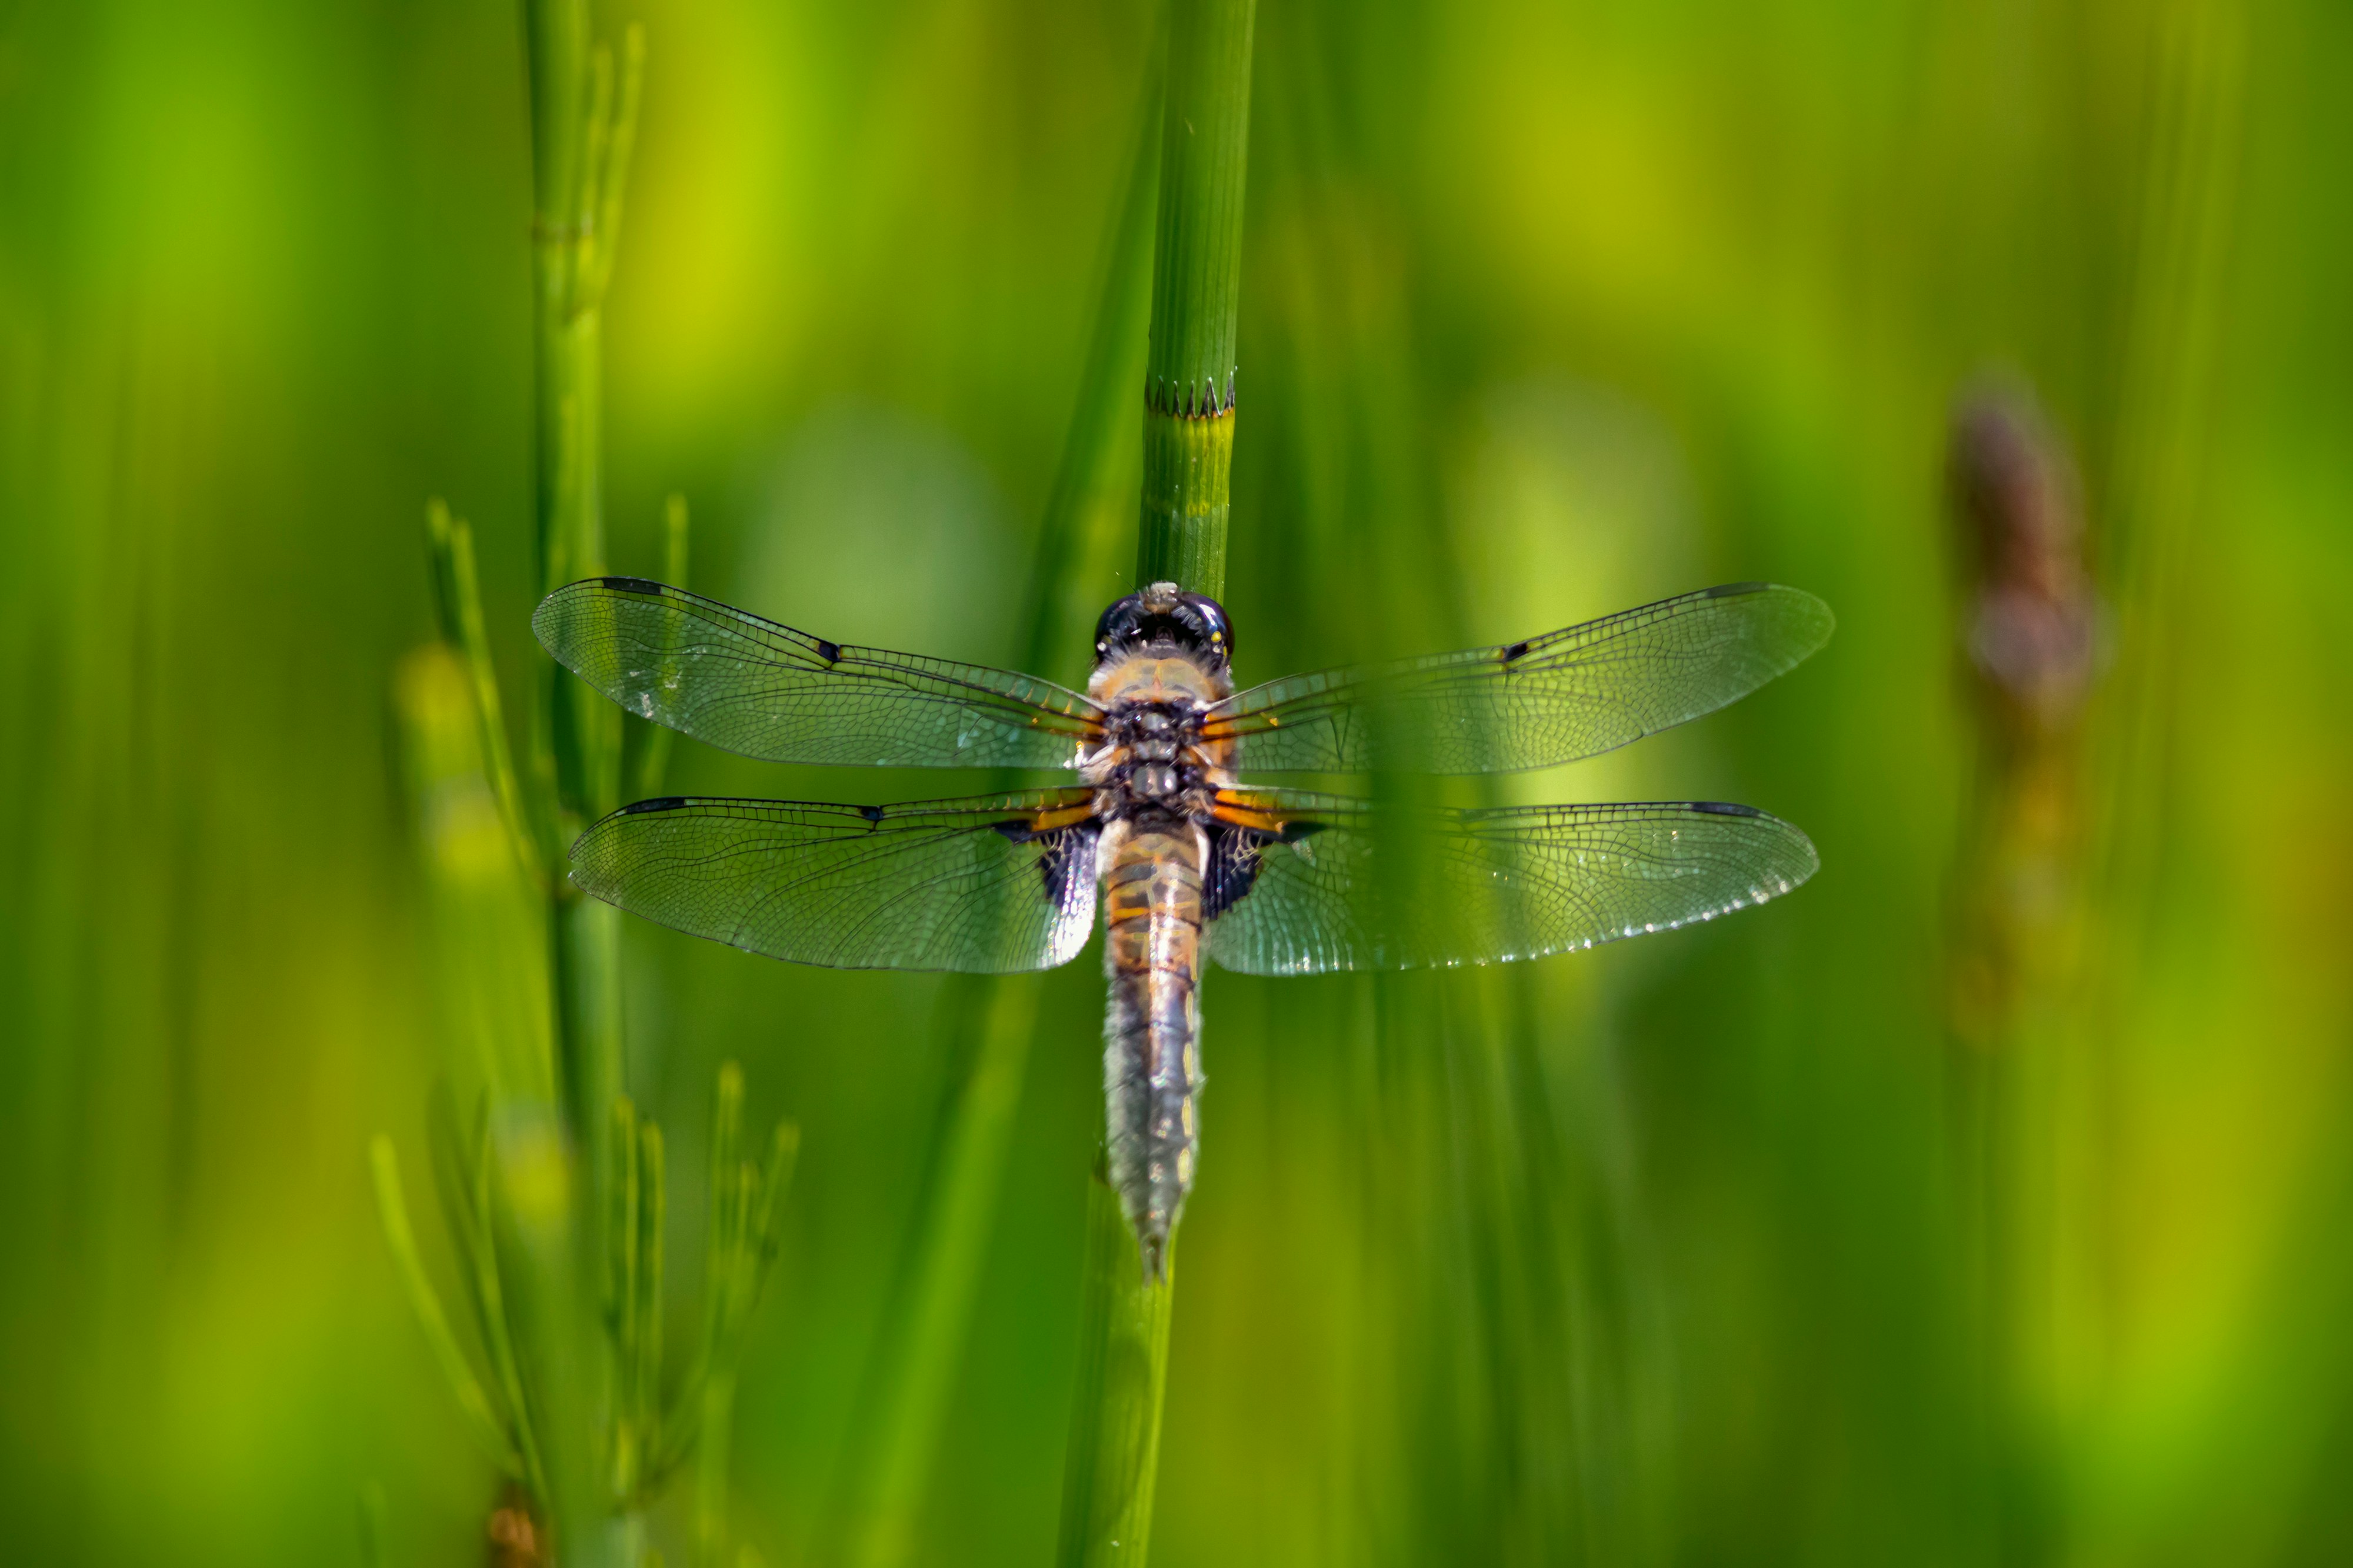 blue and white dragonfly perched on green leaf in close up photography during daytime